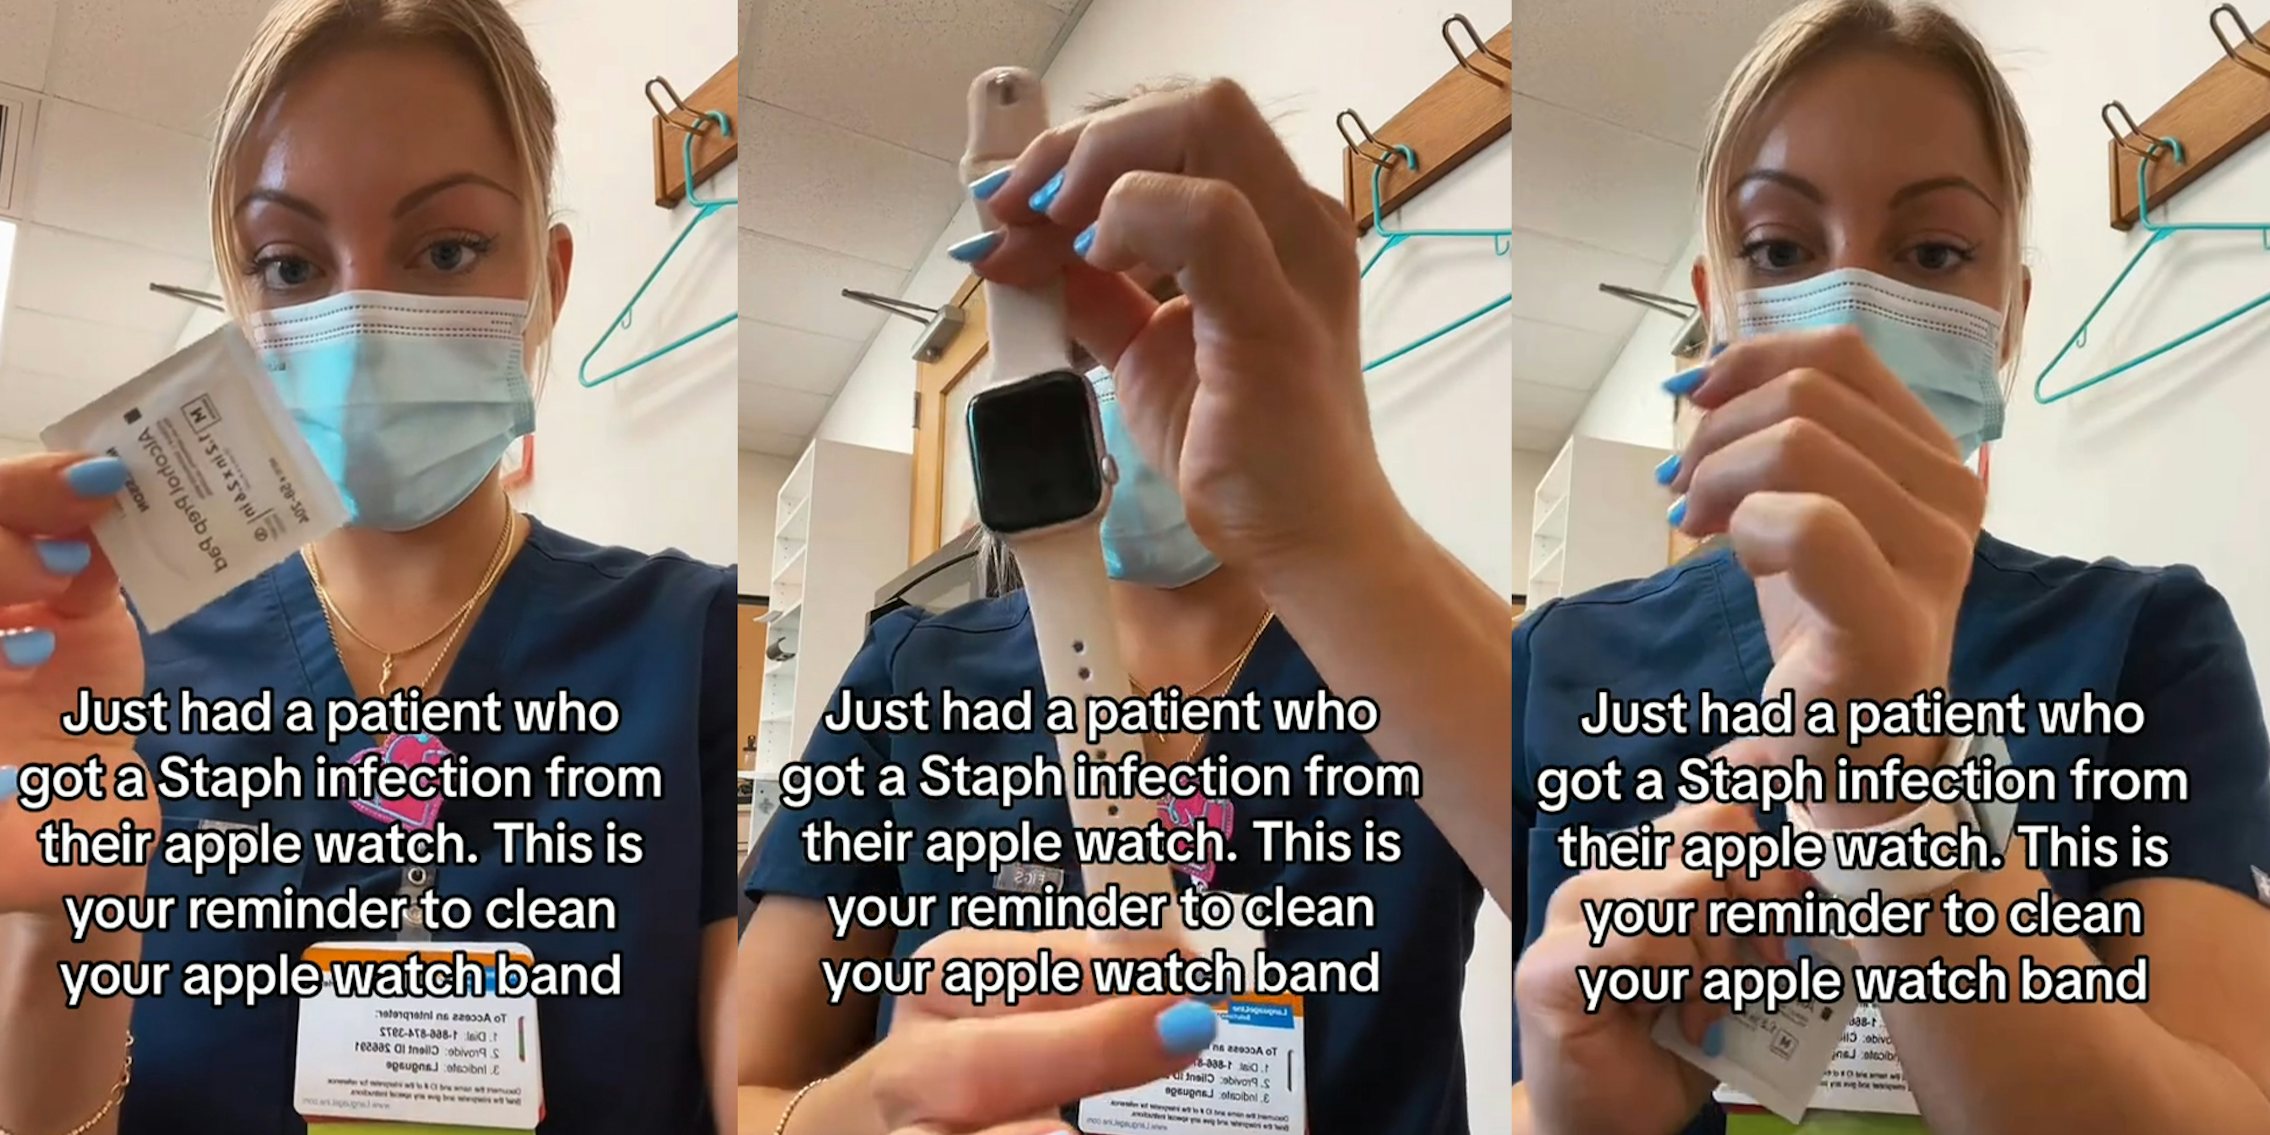 Nurse cleaning her apple watch after finding out a patient got a staph infection from one